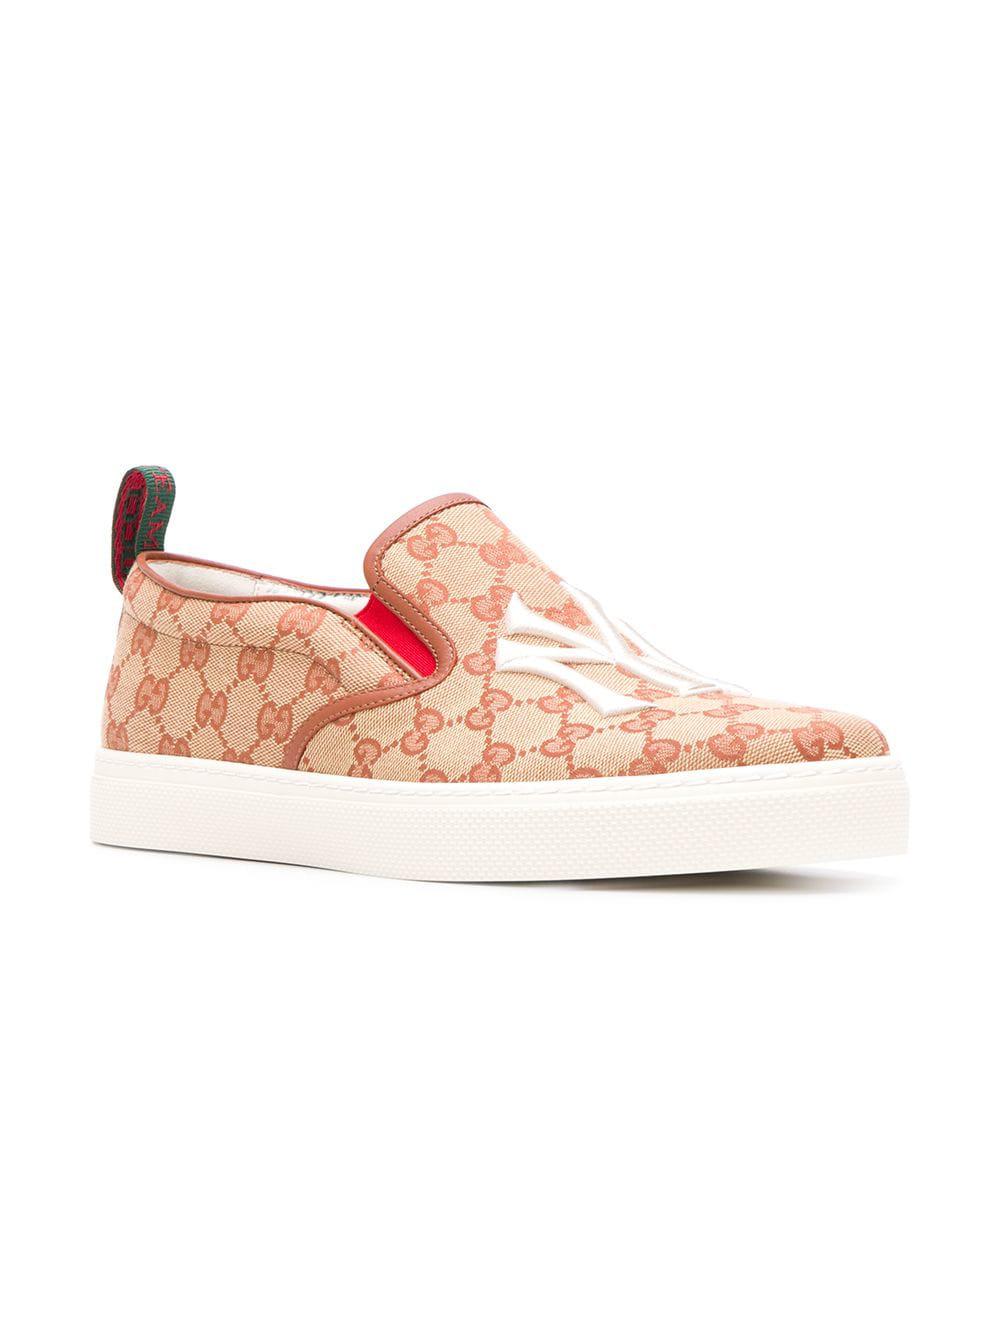 Gucci X Mlb Ny Yankees Patch Sneakers in Brown for Men